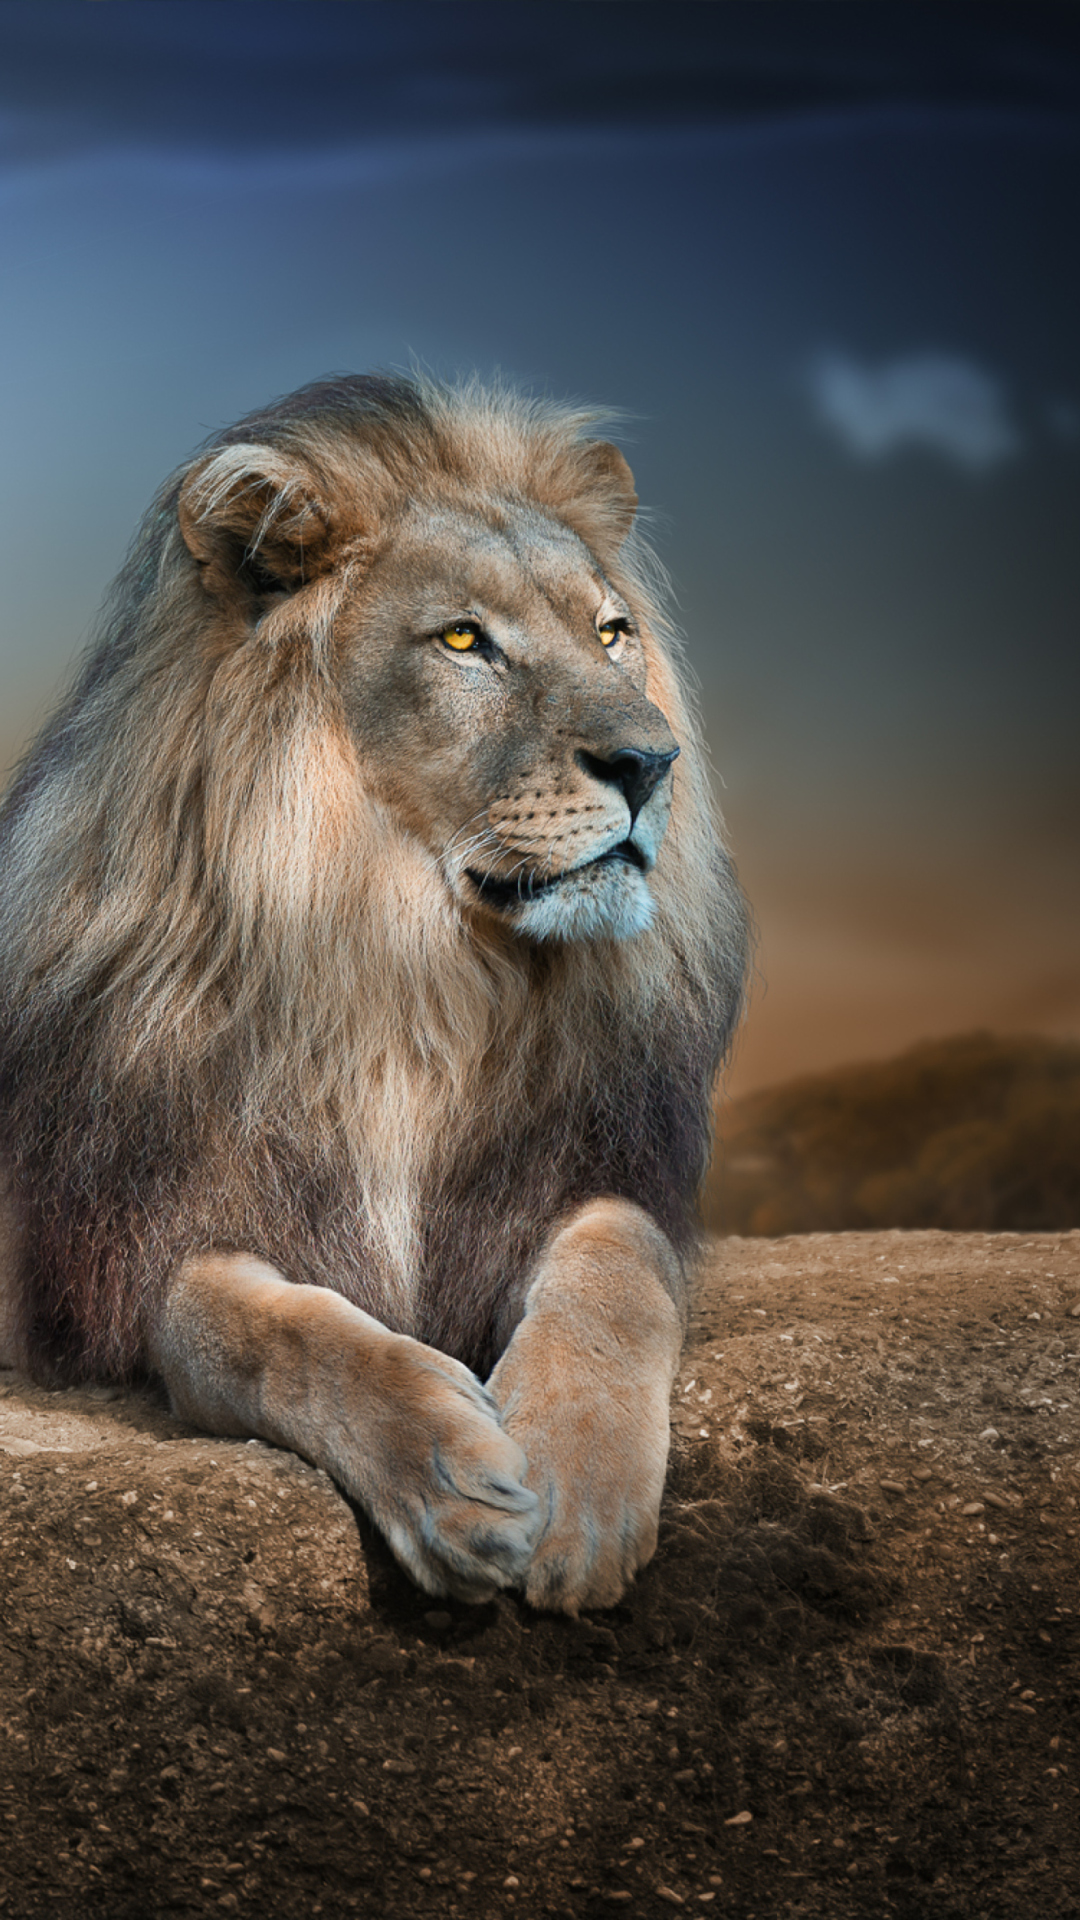 King Lion Wallpaper for iPhone 6 Plus